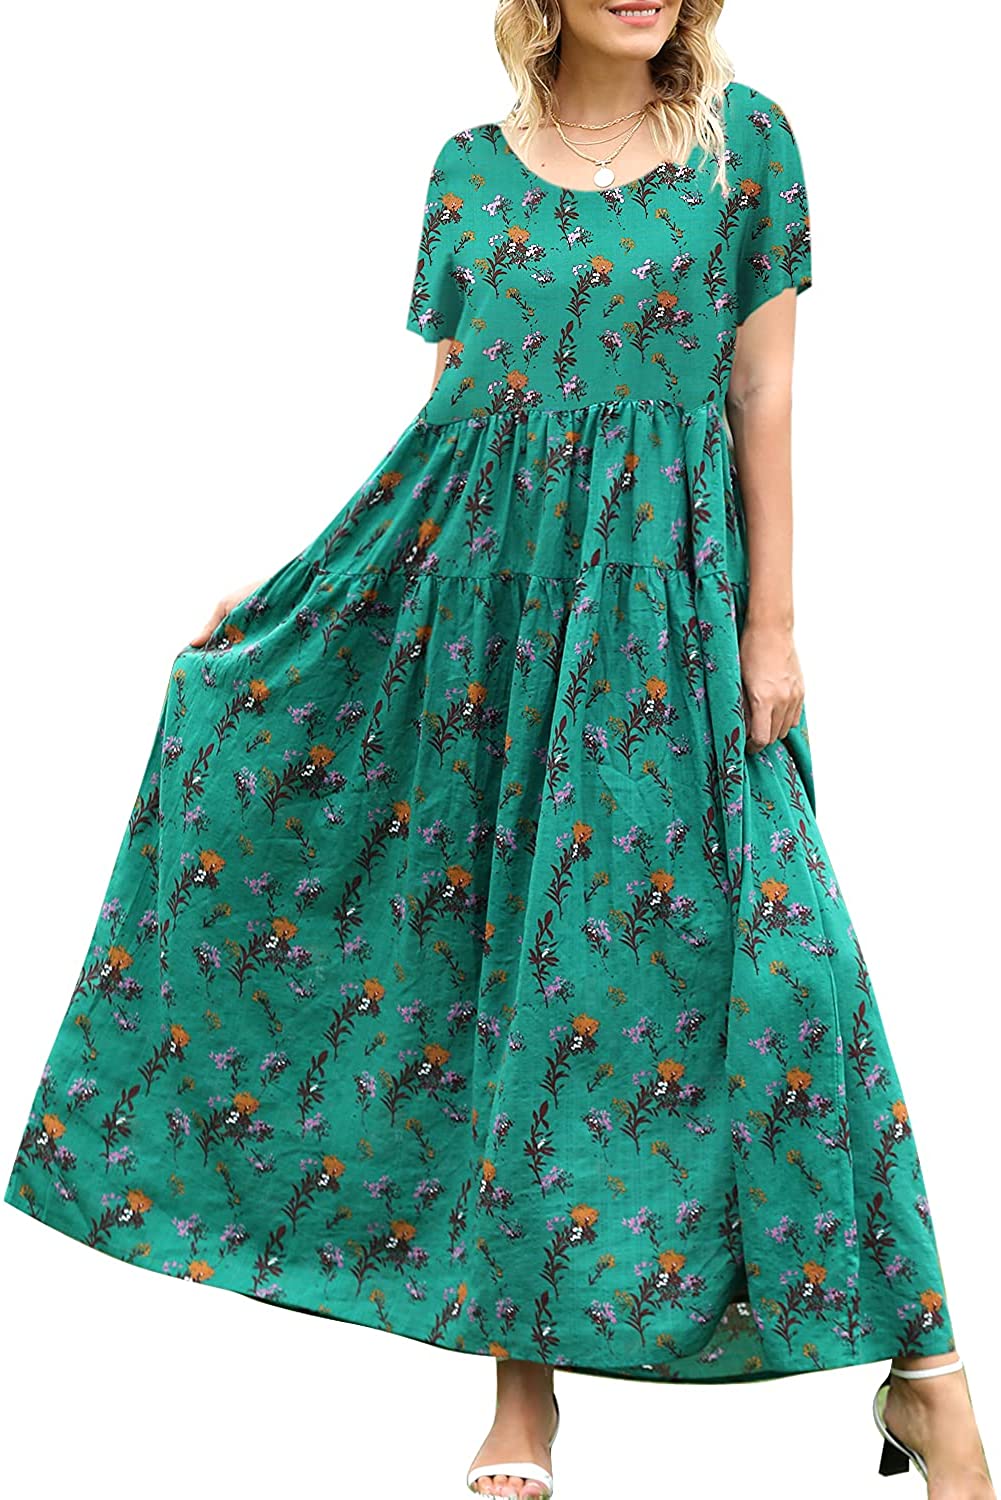 Beaurex Womens Casual Summer Maxi Dresses Loose Floral Bohemia Long Swing Dress Cotton Short Sleeve with Pockets DR6076 